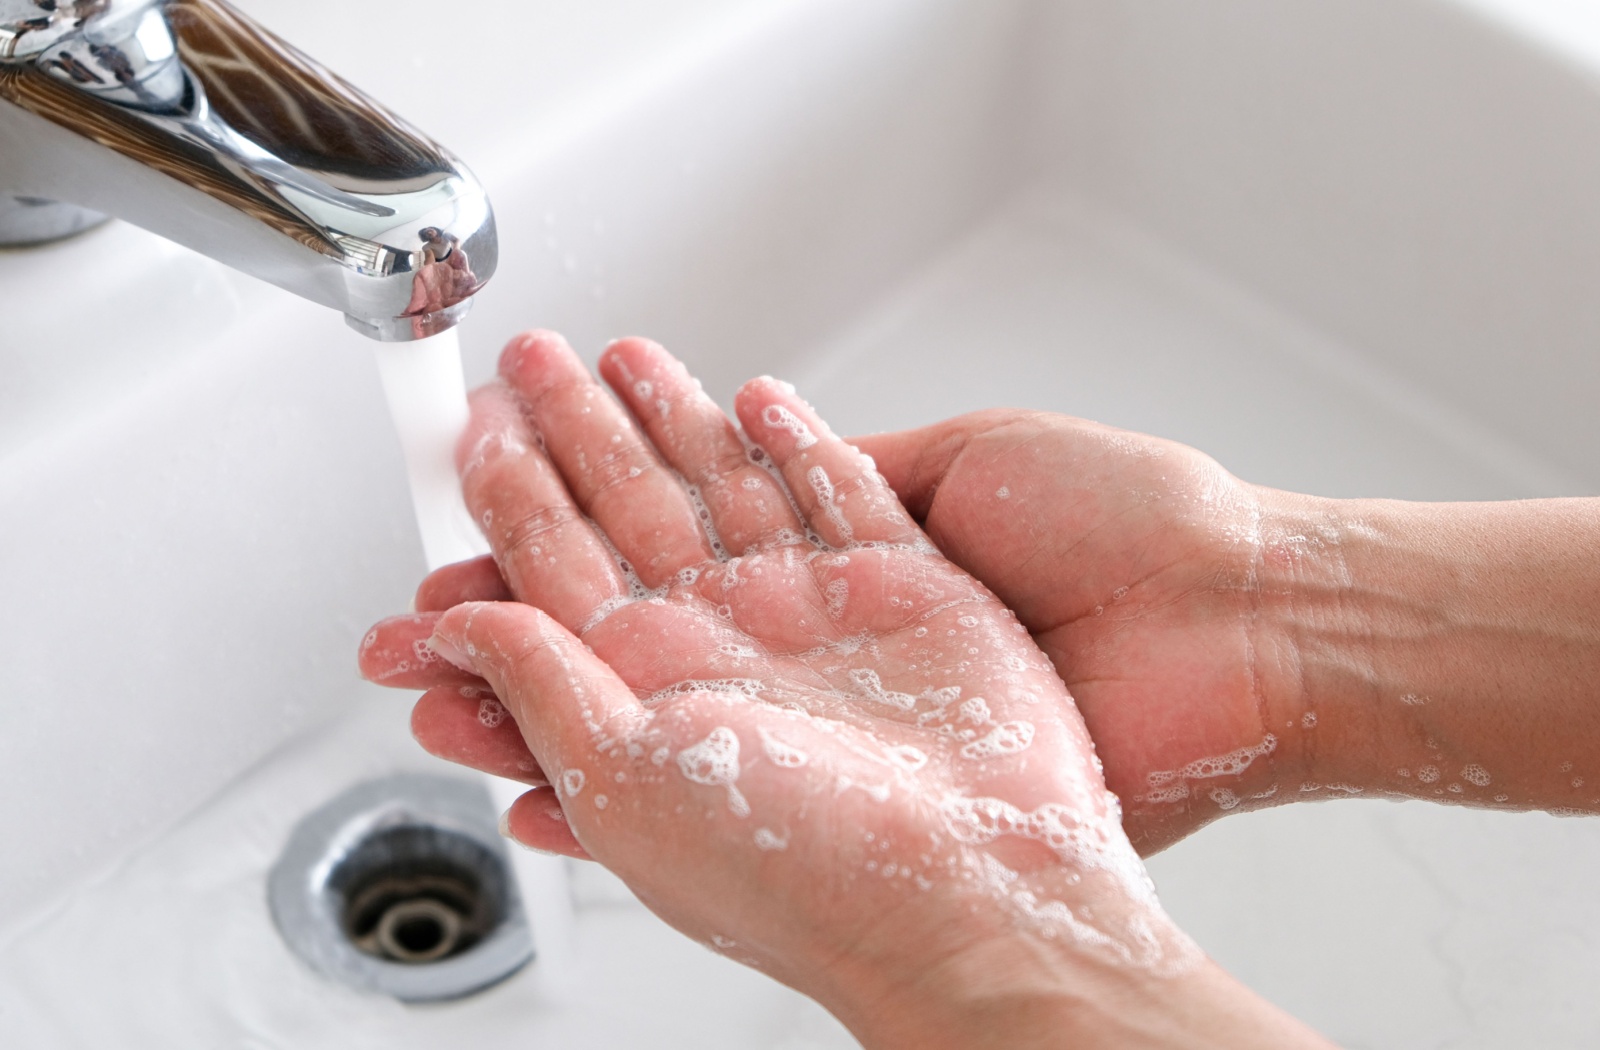 A close-up of a person's hands being washed using running water and soap.
